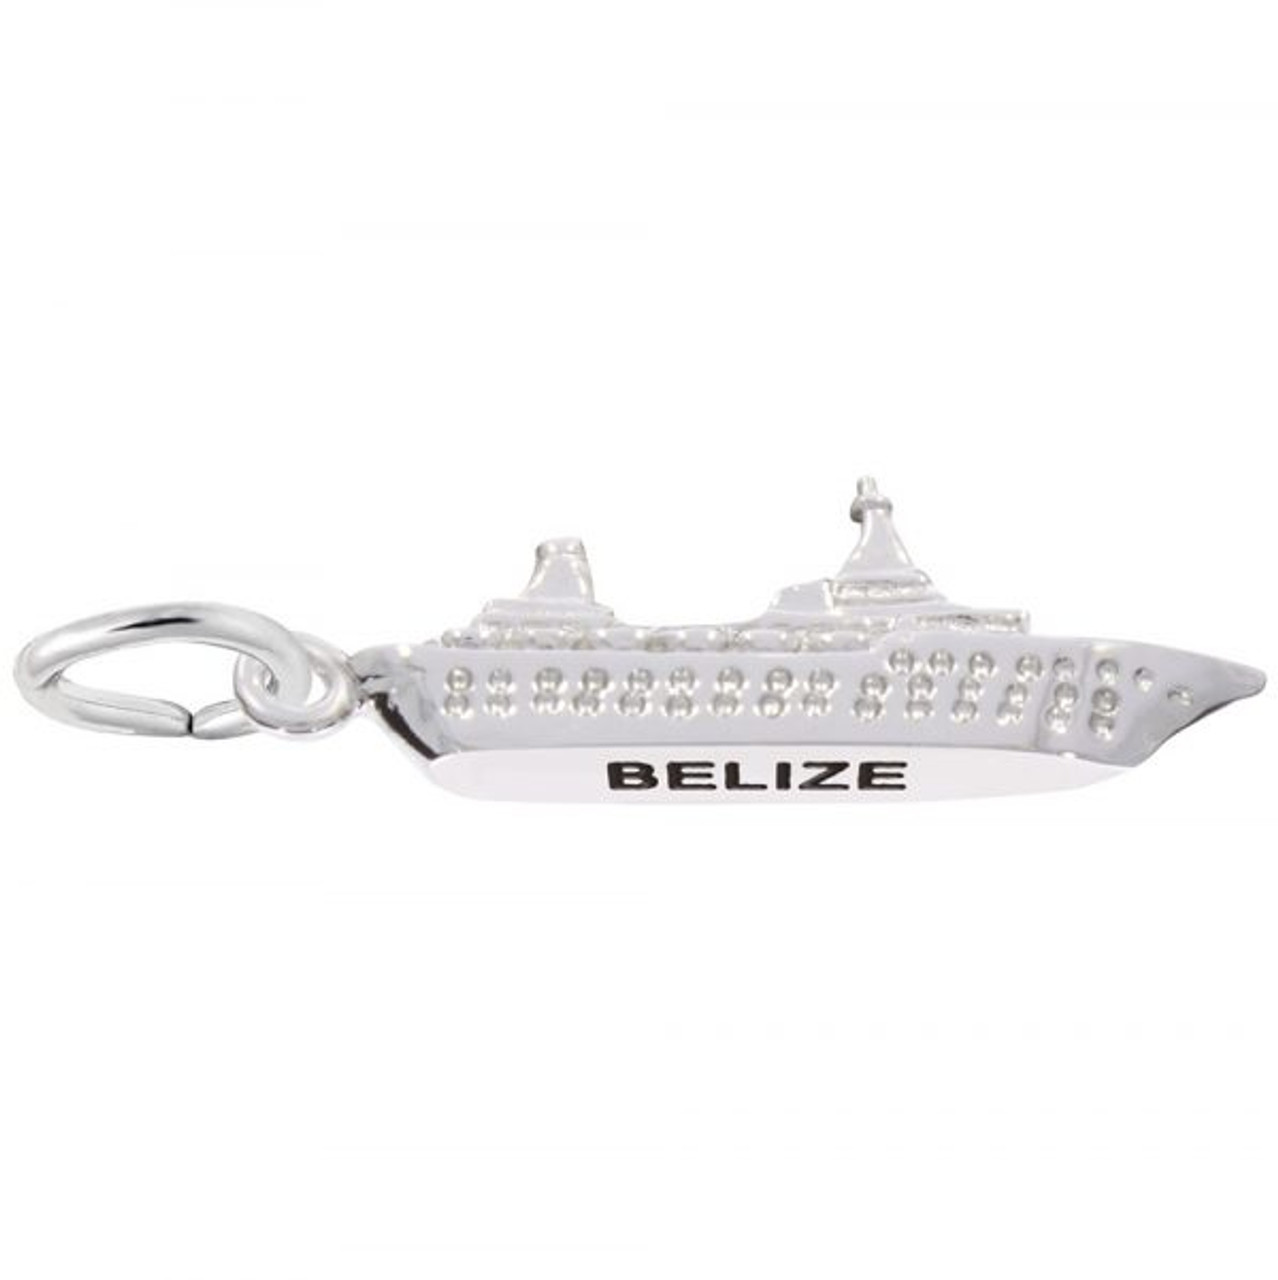 Belize Cruise Ship 3D Silver Charm - Sterling Silver and 14k White Gold